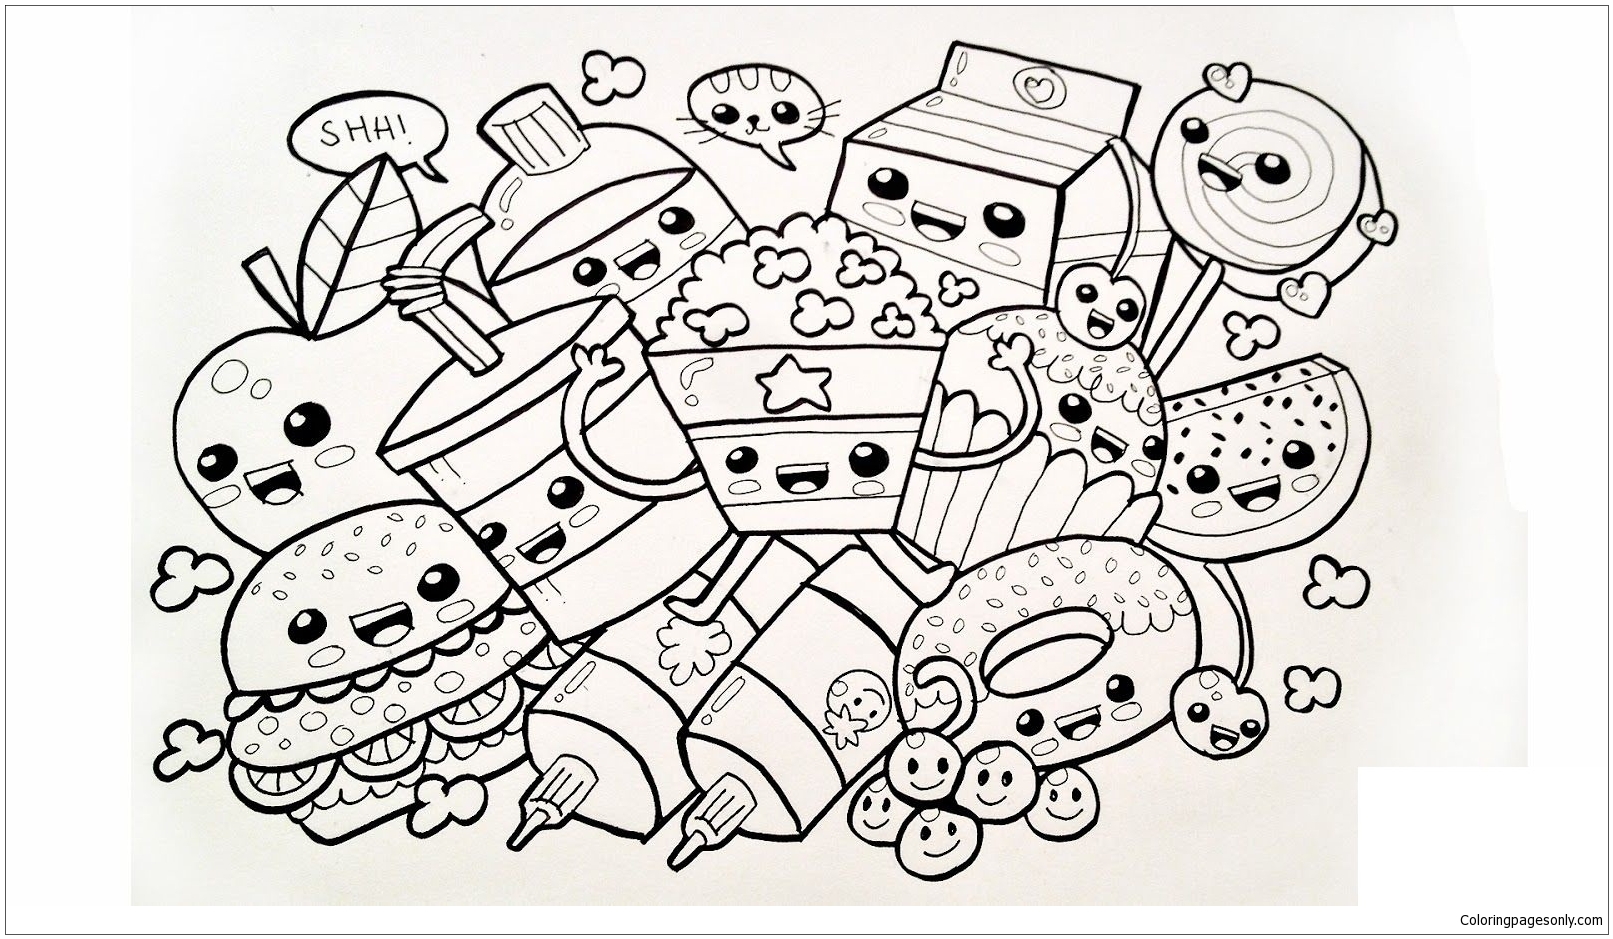 Cute Food Coloring Page   Free Coloring Pages Online